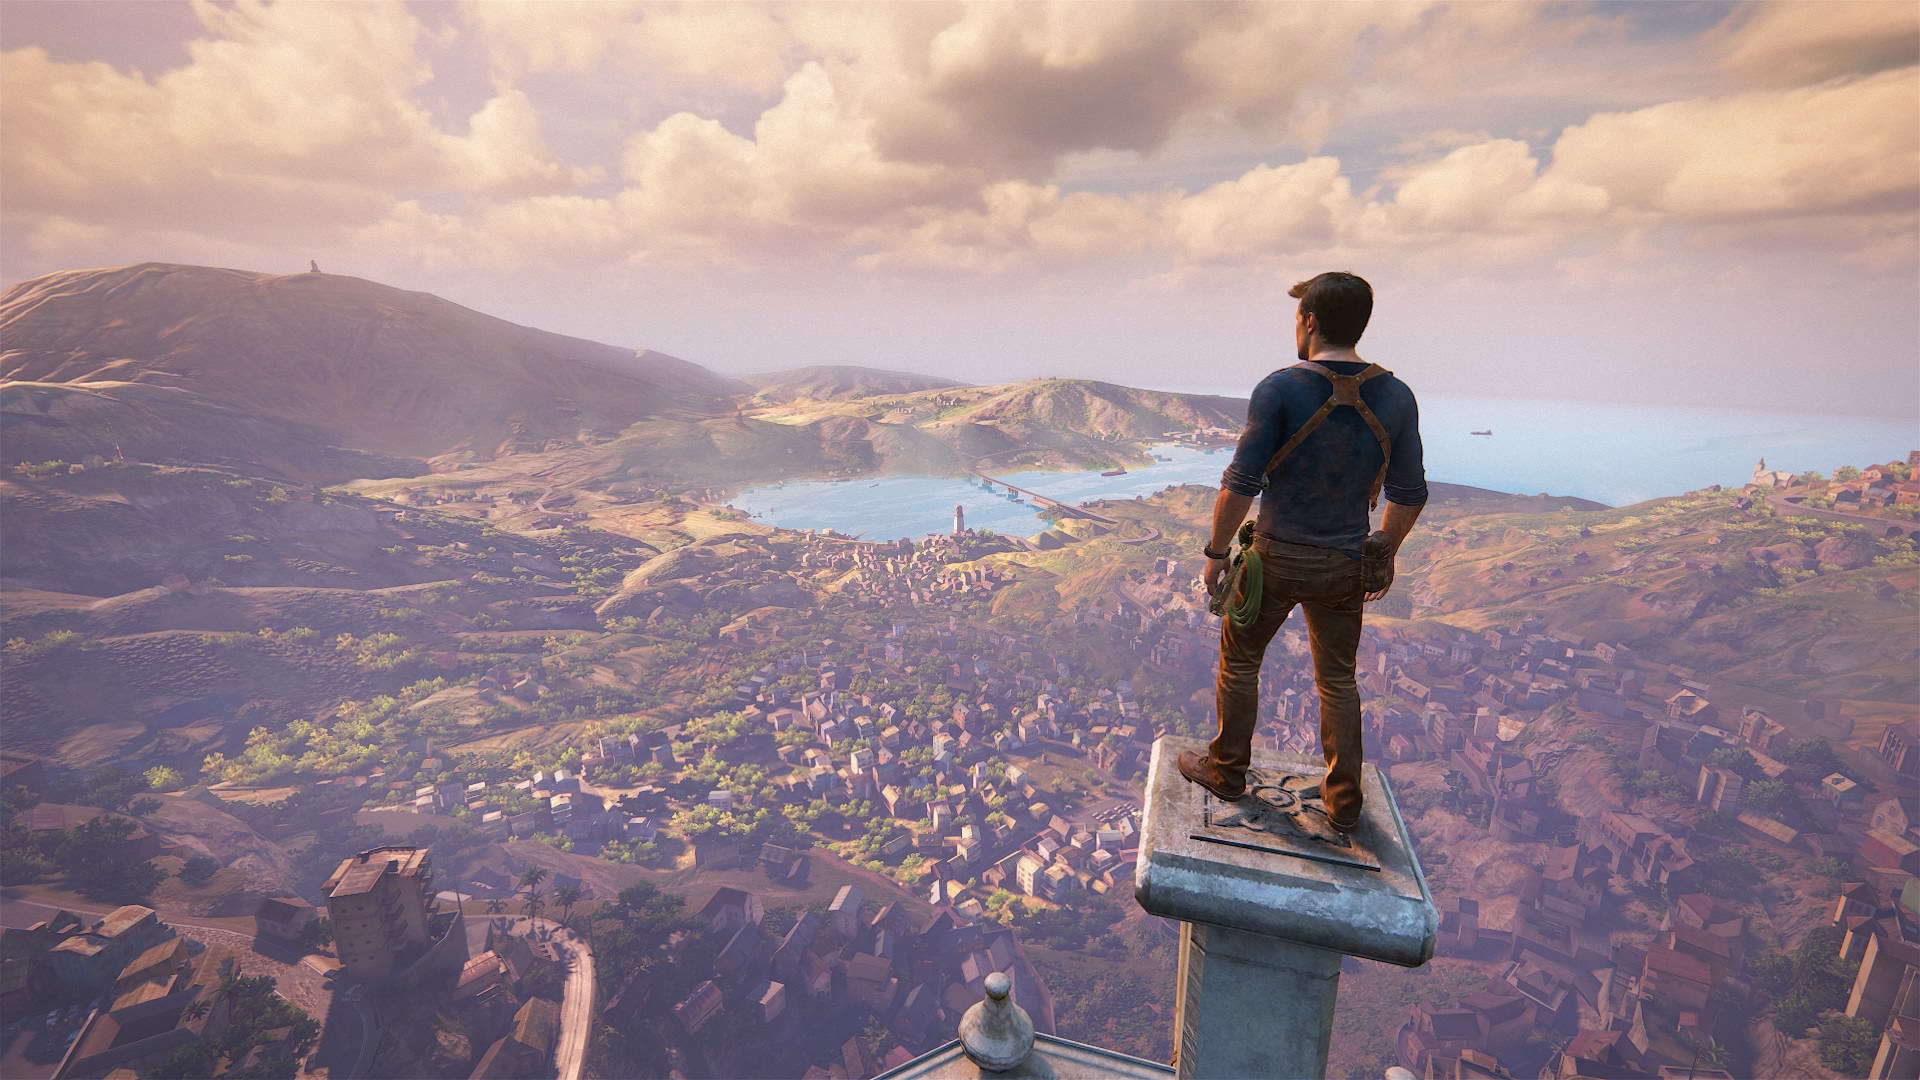 Uncharted 4, Lost Legacy Being Remastered For PS5 And PC